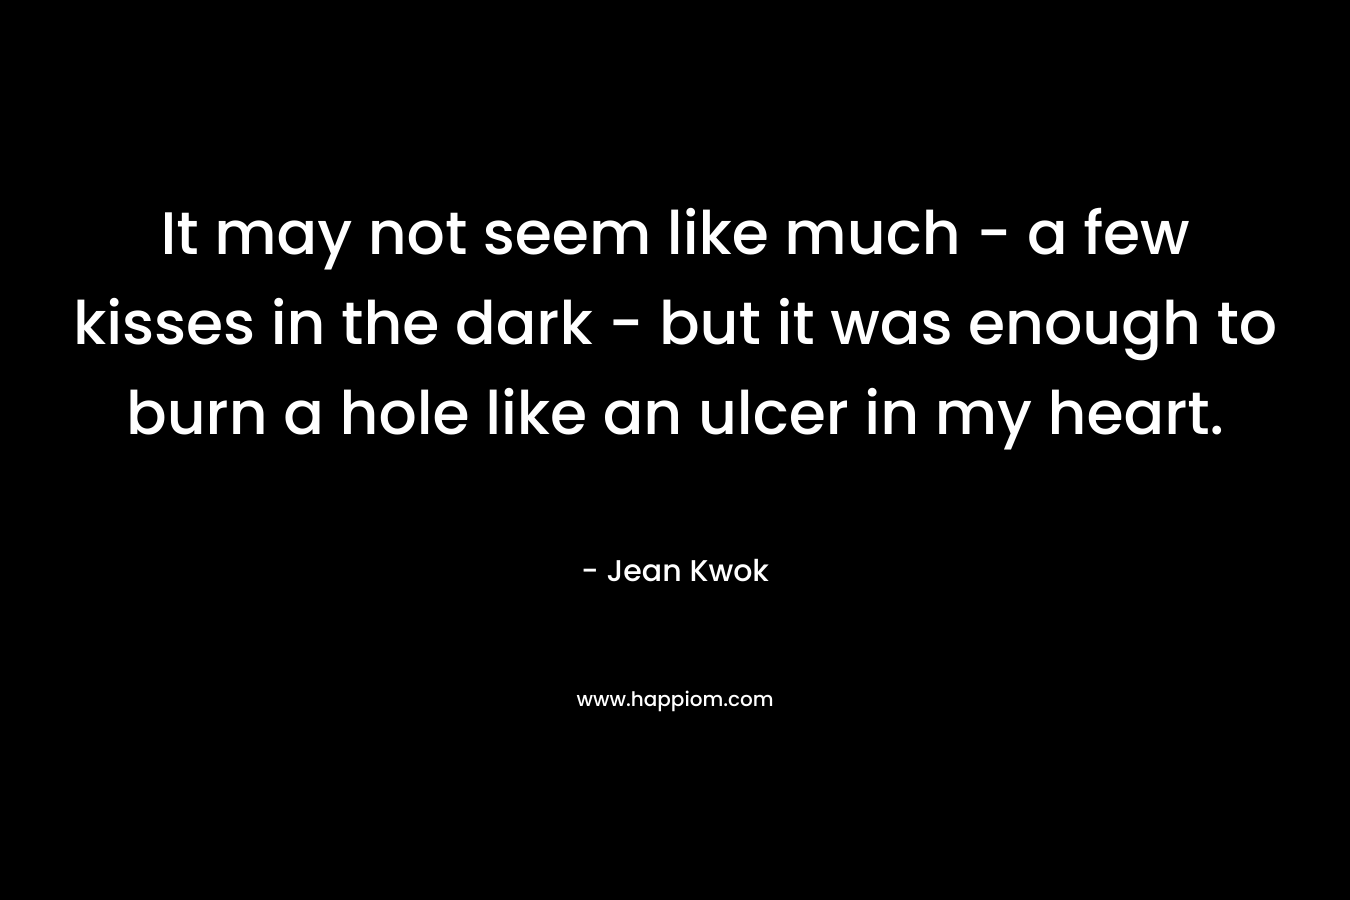 It may not seem like much – a few kisses in the dark – but it was enough to burn a hole like an ulcer in my heart. – Jean Kwok